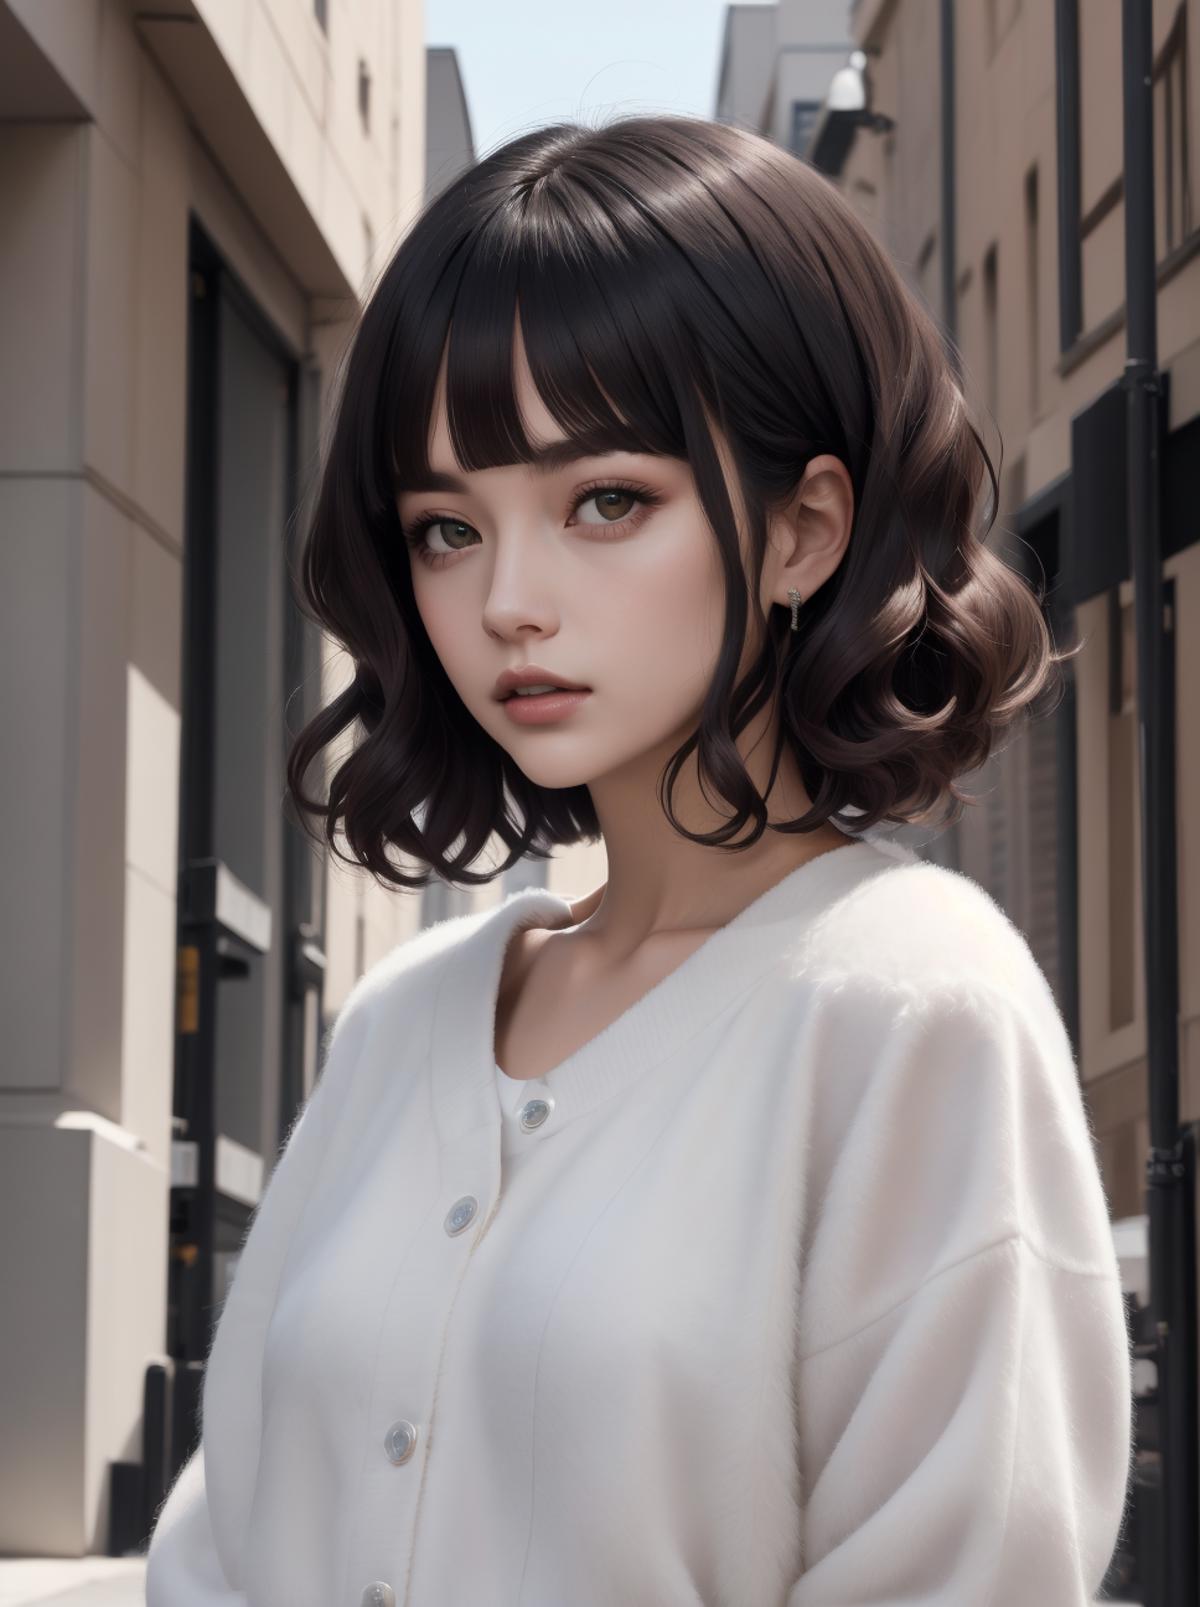 All-in-one Hairstyle Bundle image by n15g